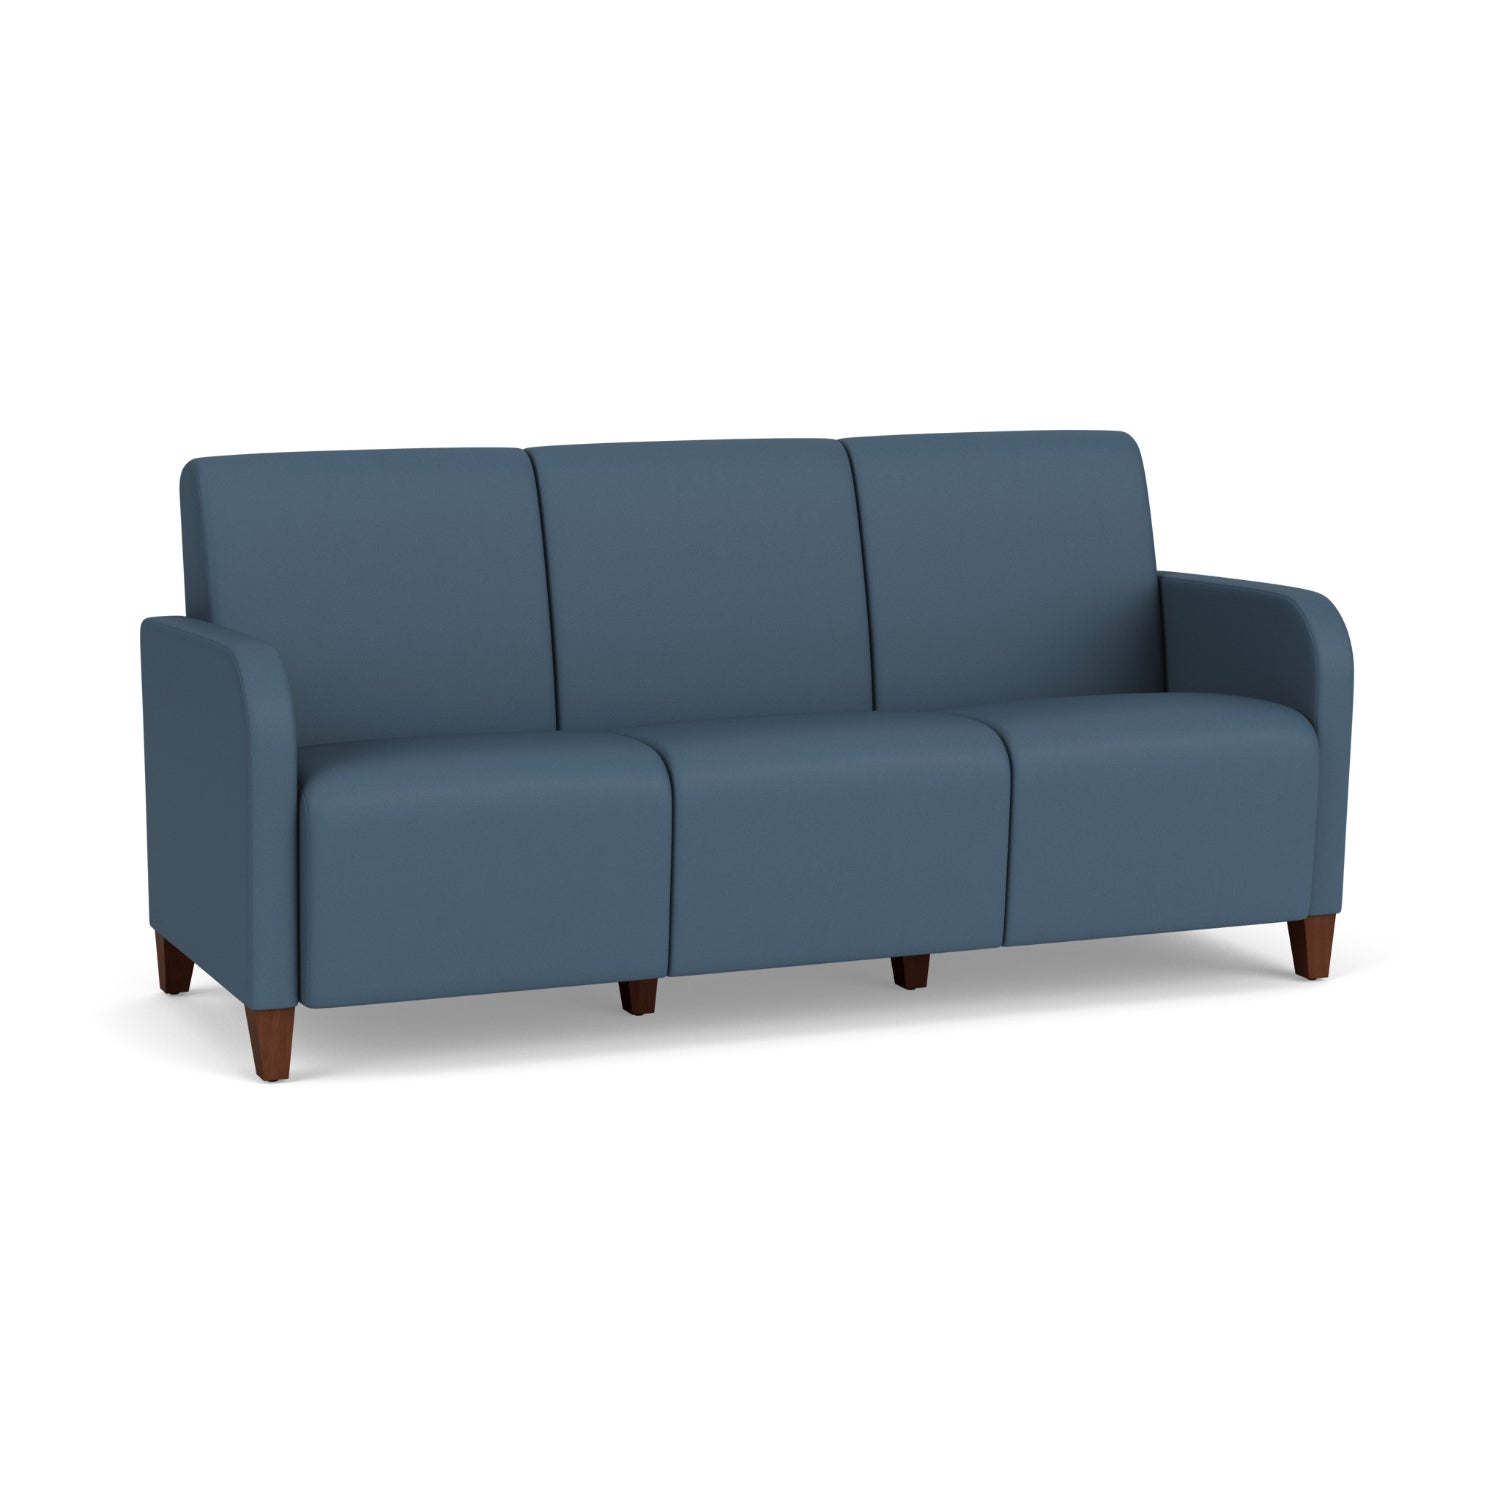 Siena Collection Reception Seating, 3-Seat Sofa, Standard Vinyl Upholstery, FREE SHIPPING